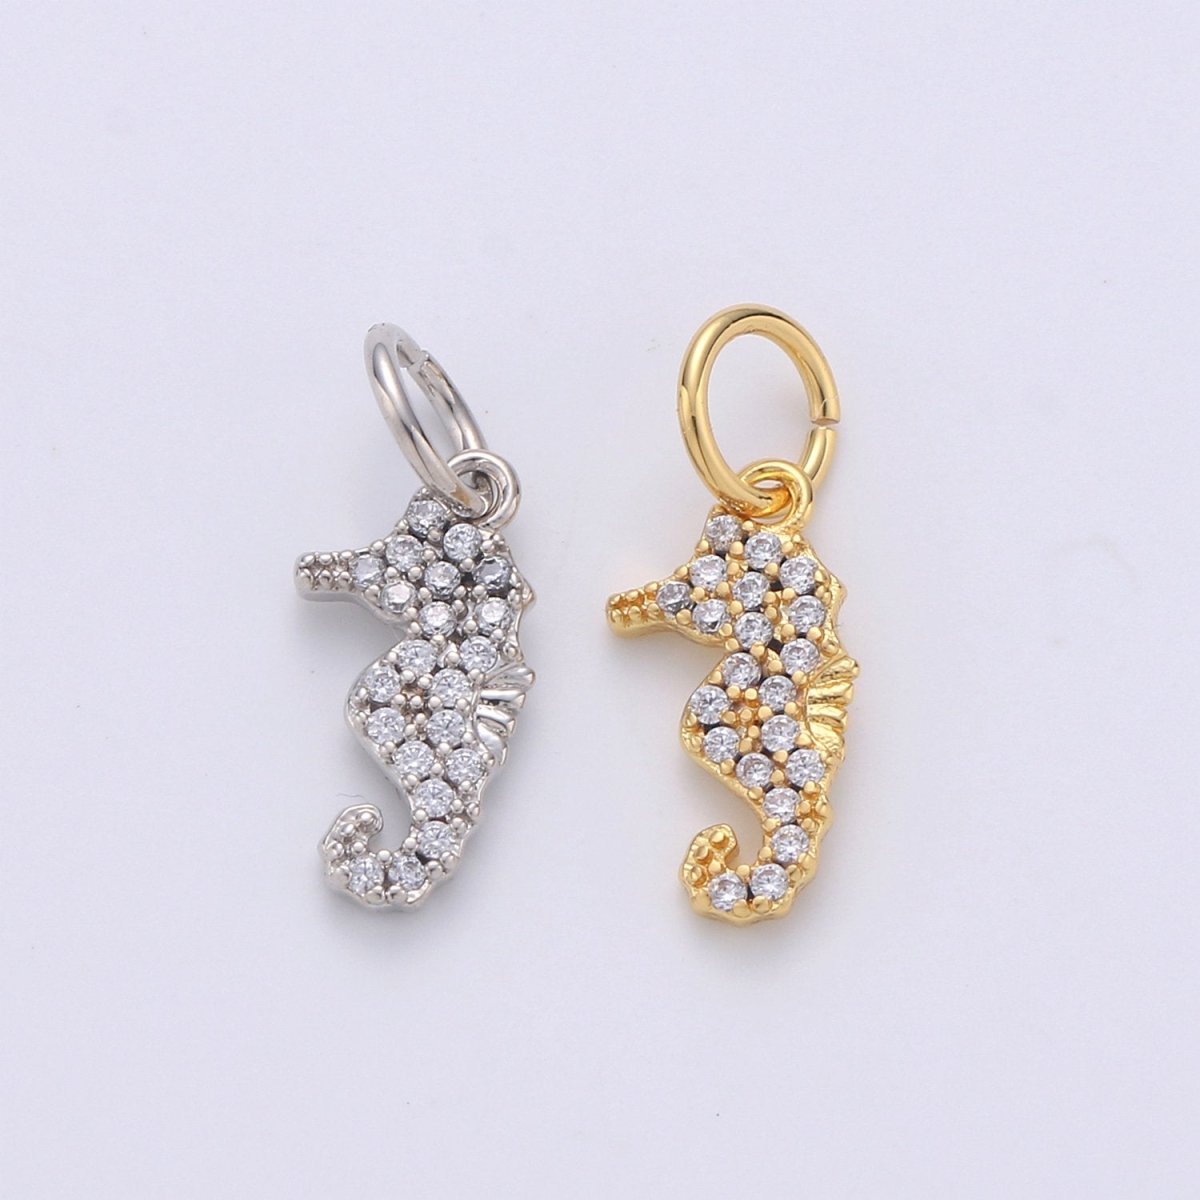 Seahorse 24K Gold Filled Tiny Charms, Gold Filled Seahorse Charm, Gold Seahorse, Silver Sea horse charm Under the sea Jewelry Inspired D-551 D-552 D-698 D-699 - DLUXCA